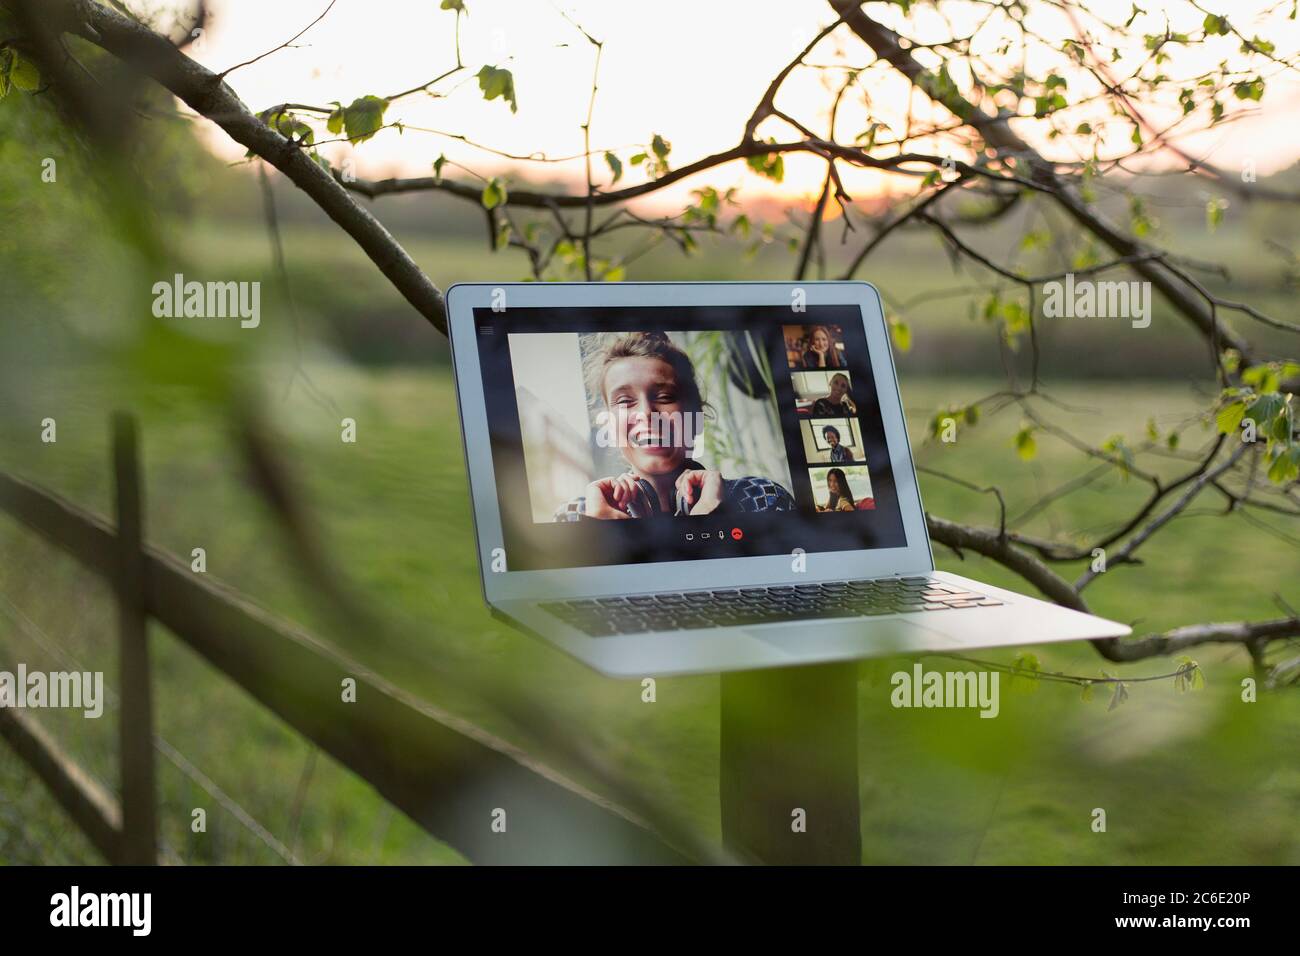 Friends video chatting on laptop screen on rural fence post Stock Photo